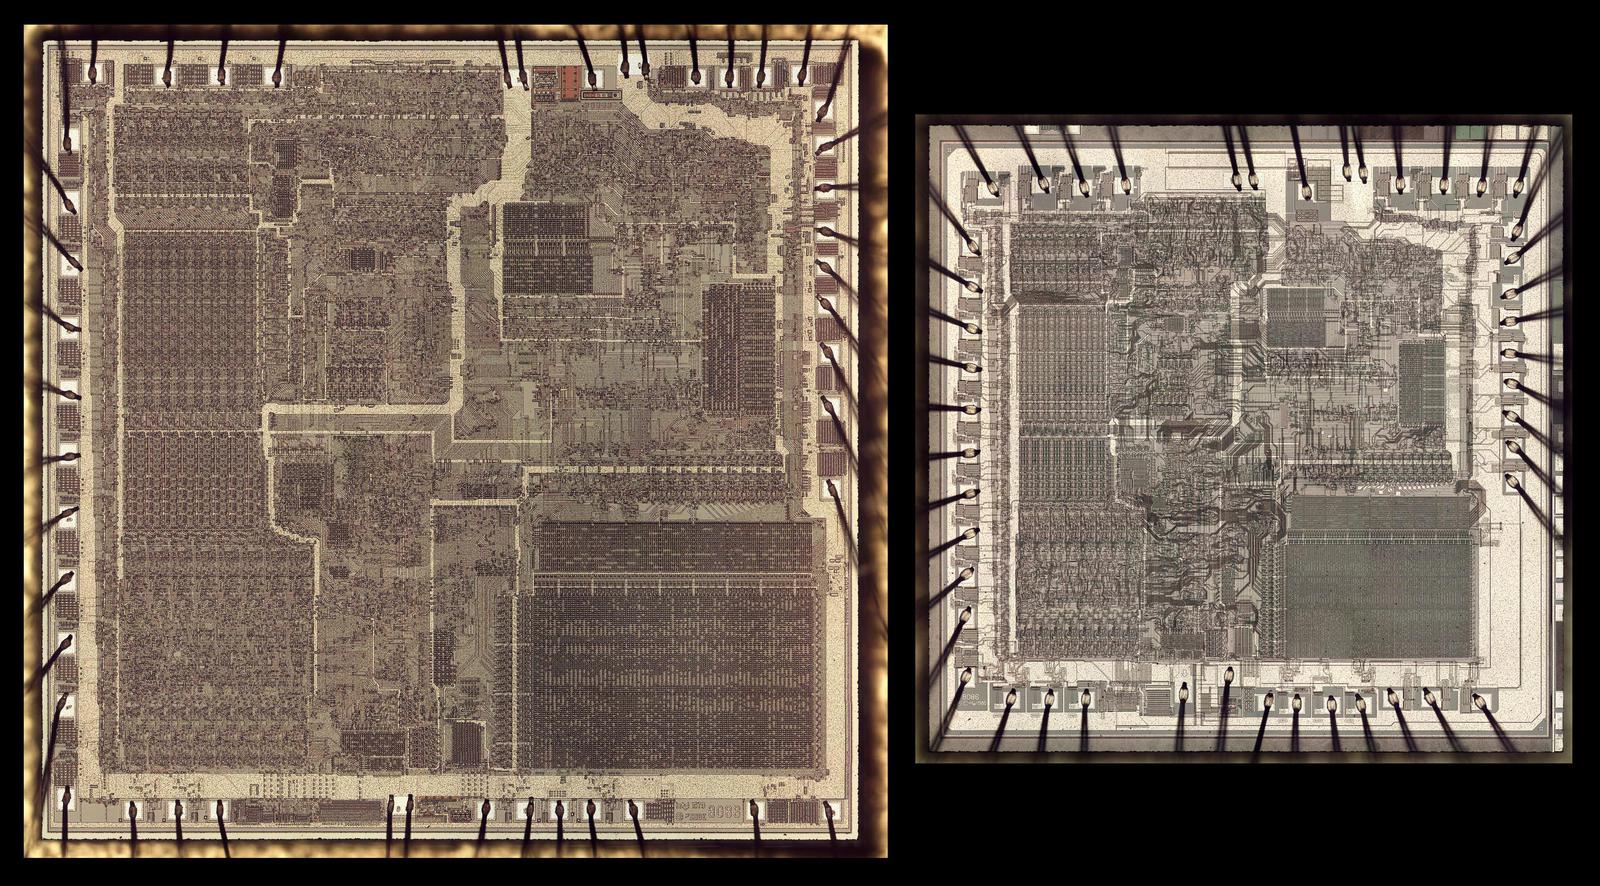 Two versions of the 8086 die, at the same scale. The bond wires are connected to pads around the edge of the die.